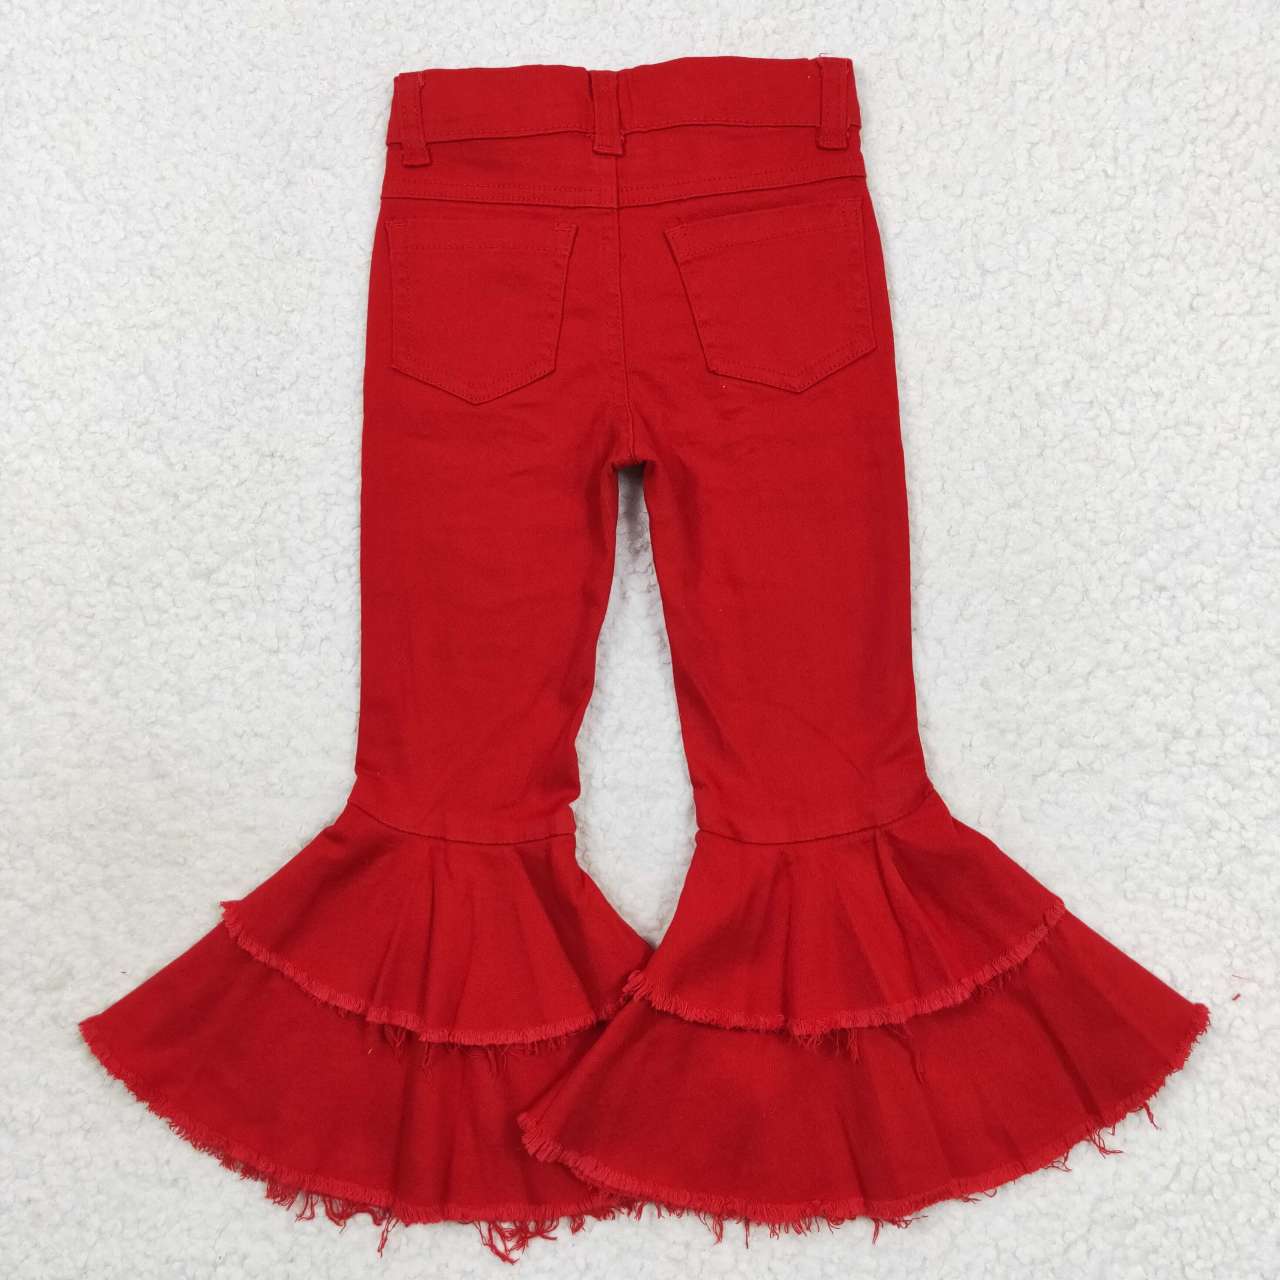 P0270 Distressed red double-flare denim trousers